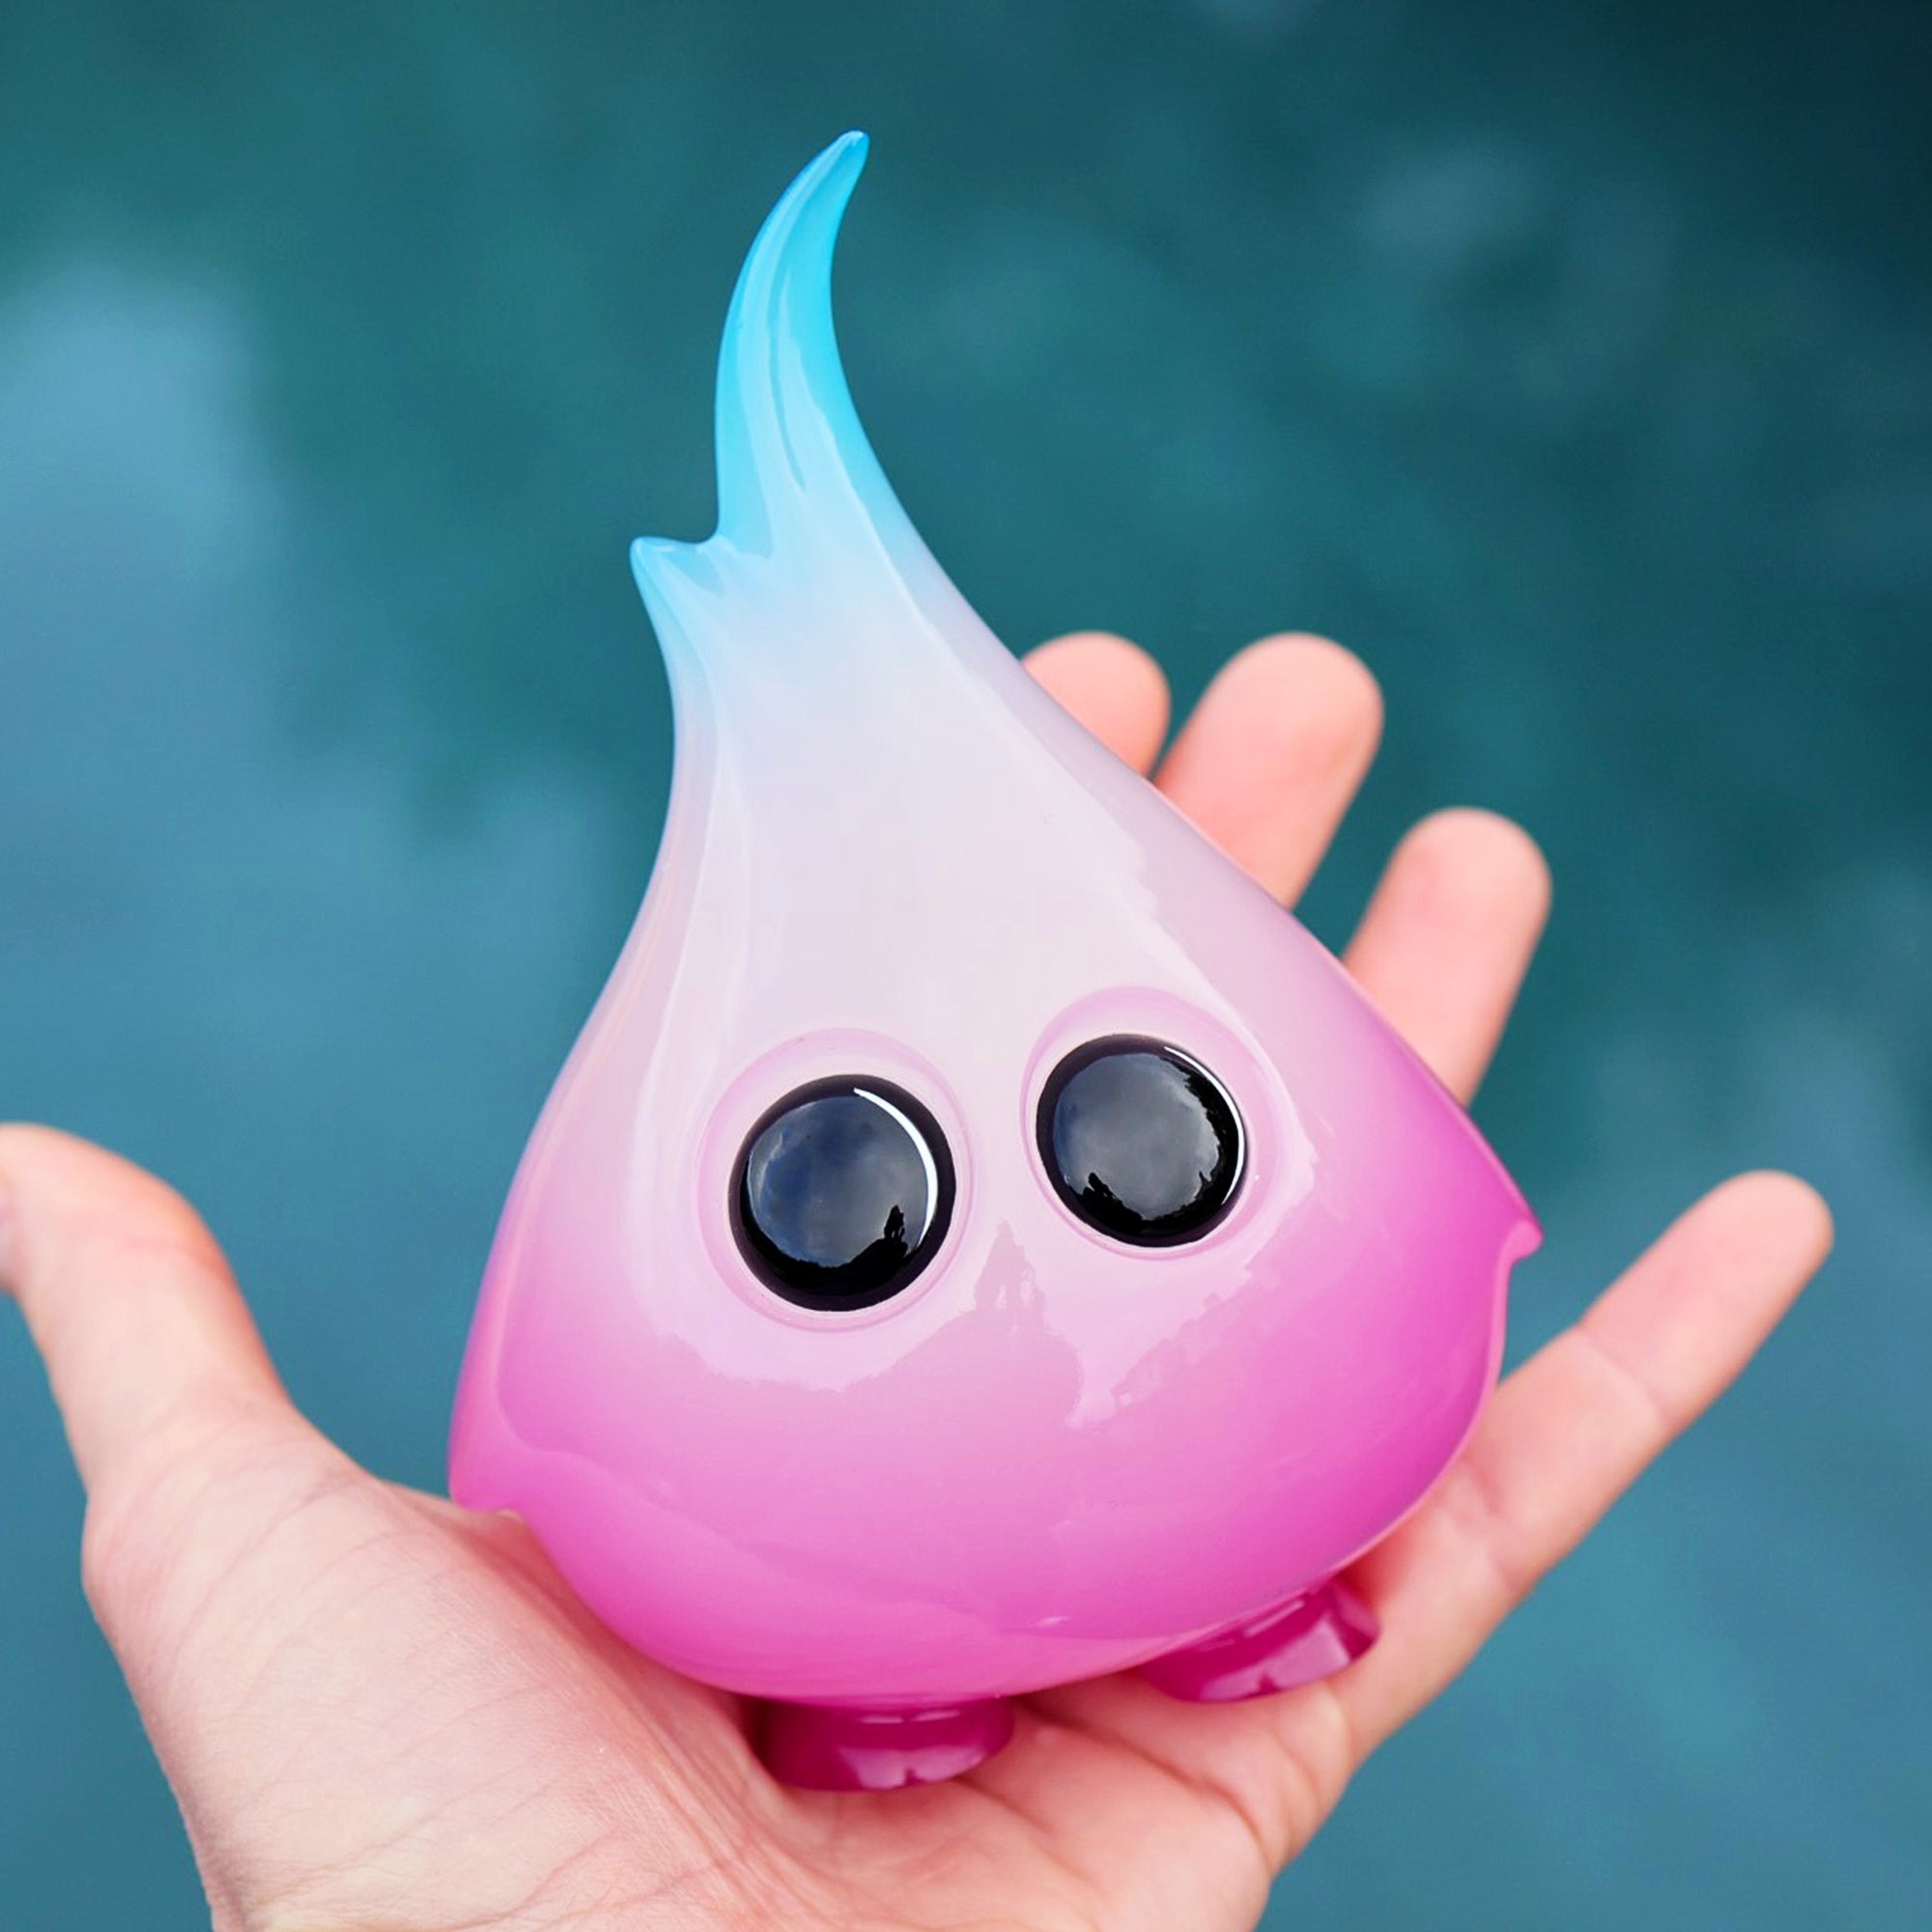 Moon Flare Spark-ling toy held in hand, limited edition resin figure, 5.25 tall.